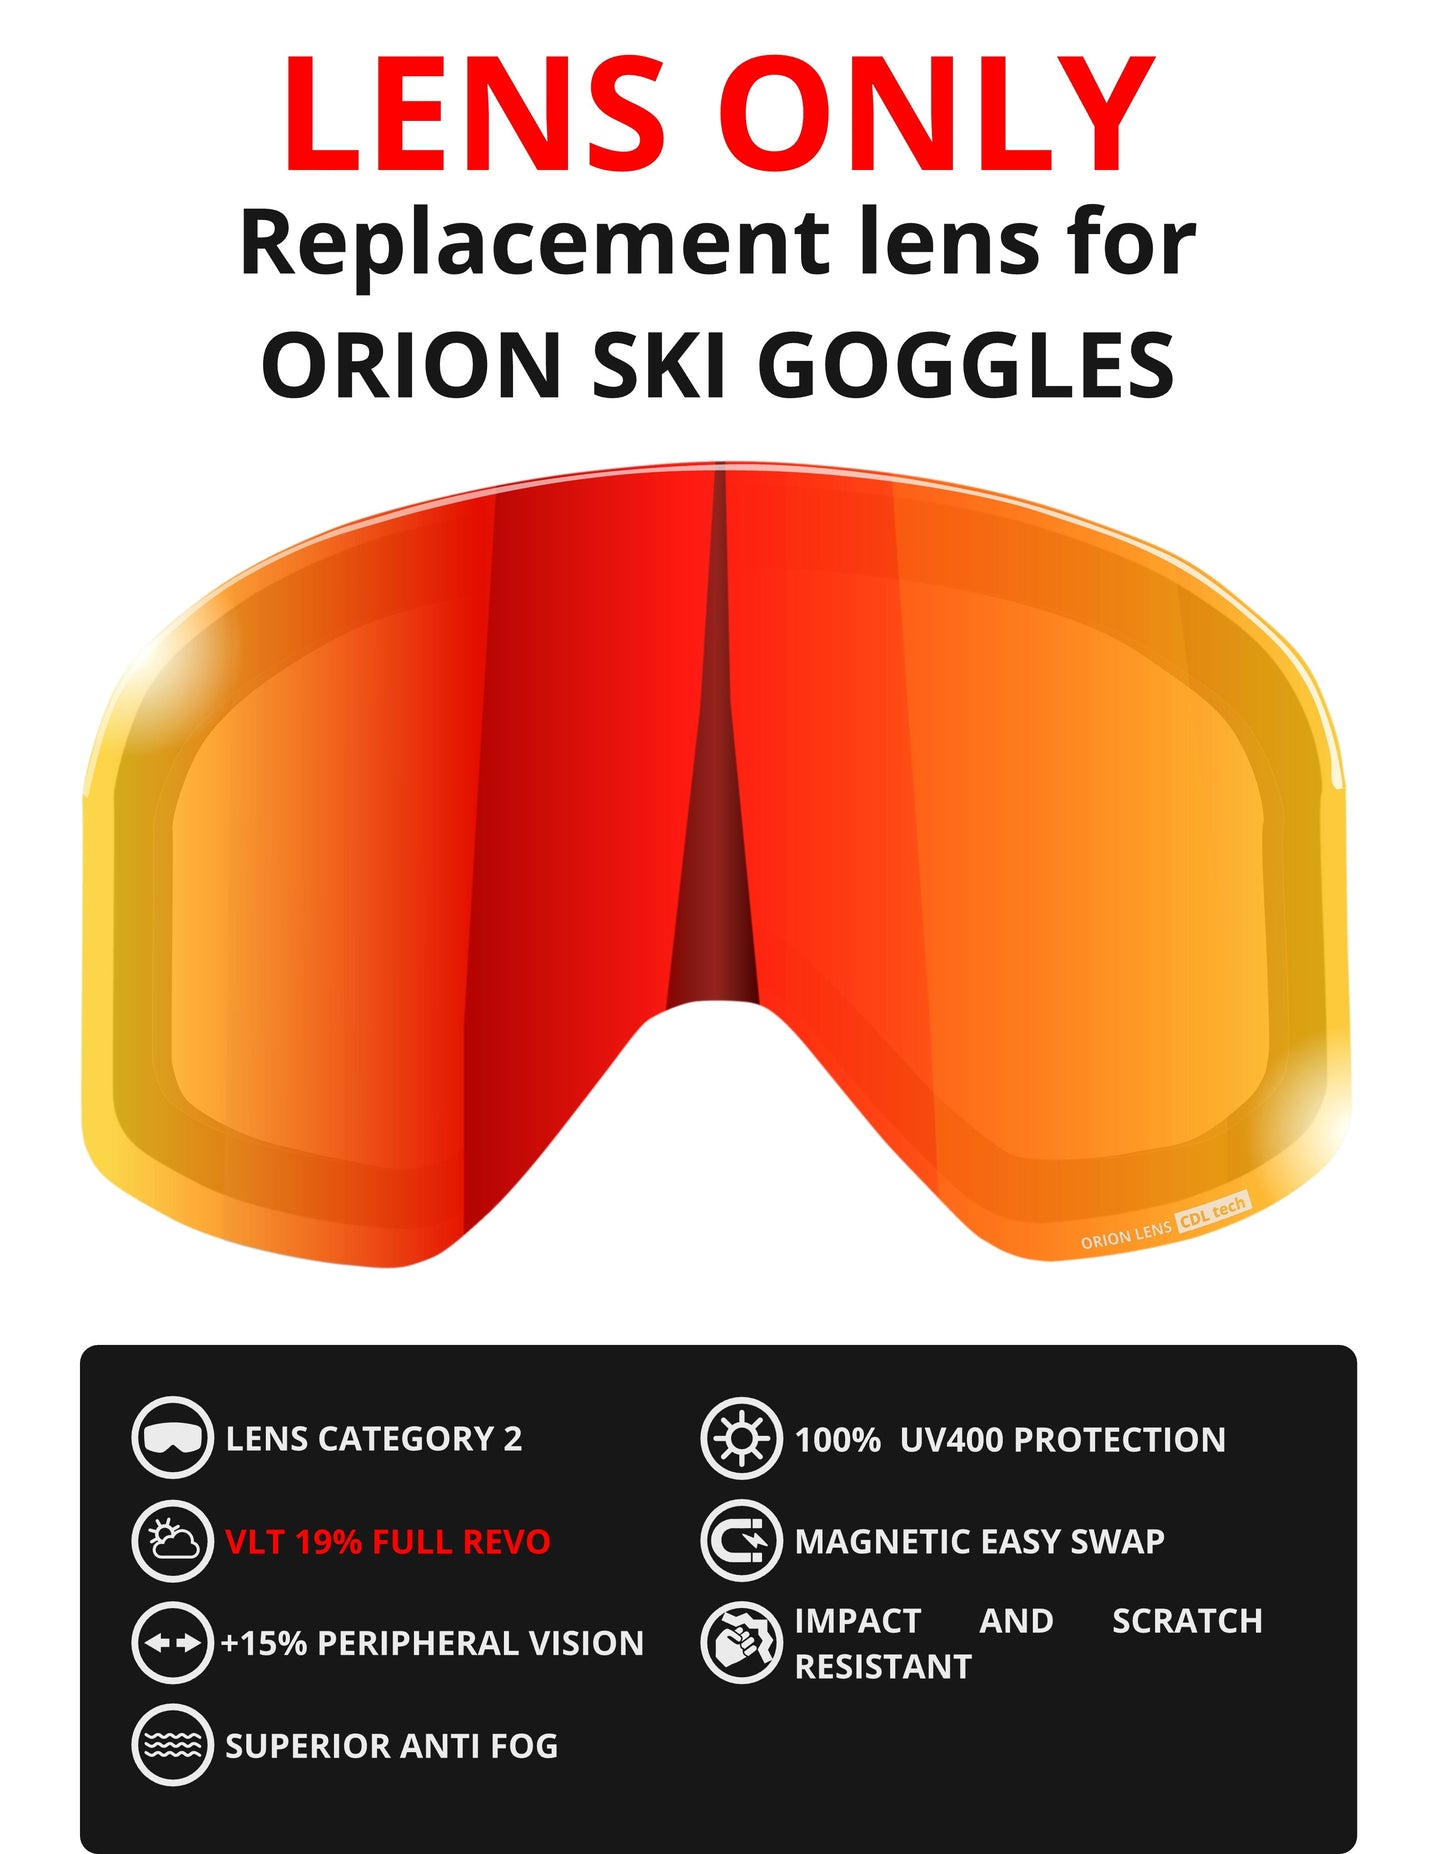 LENS ONLY - FULL REVO replacement lens for 6fiftyfive Orion ski goggles for men and women - VLT 19% - Fire Red - 6fiftyfive